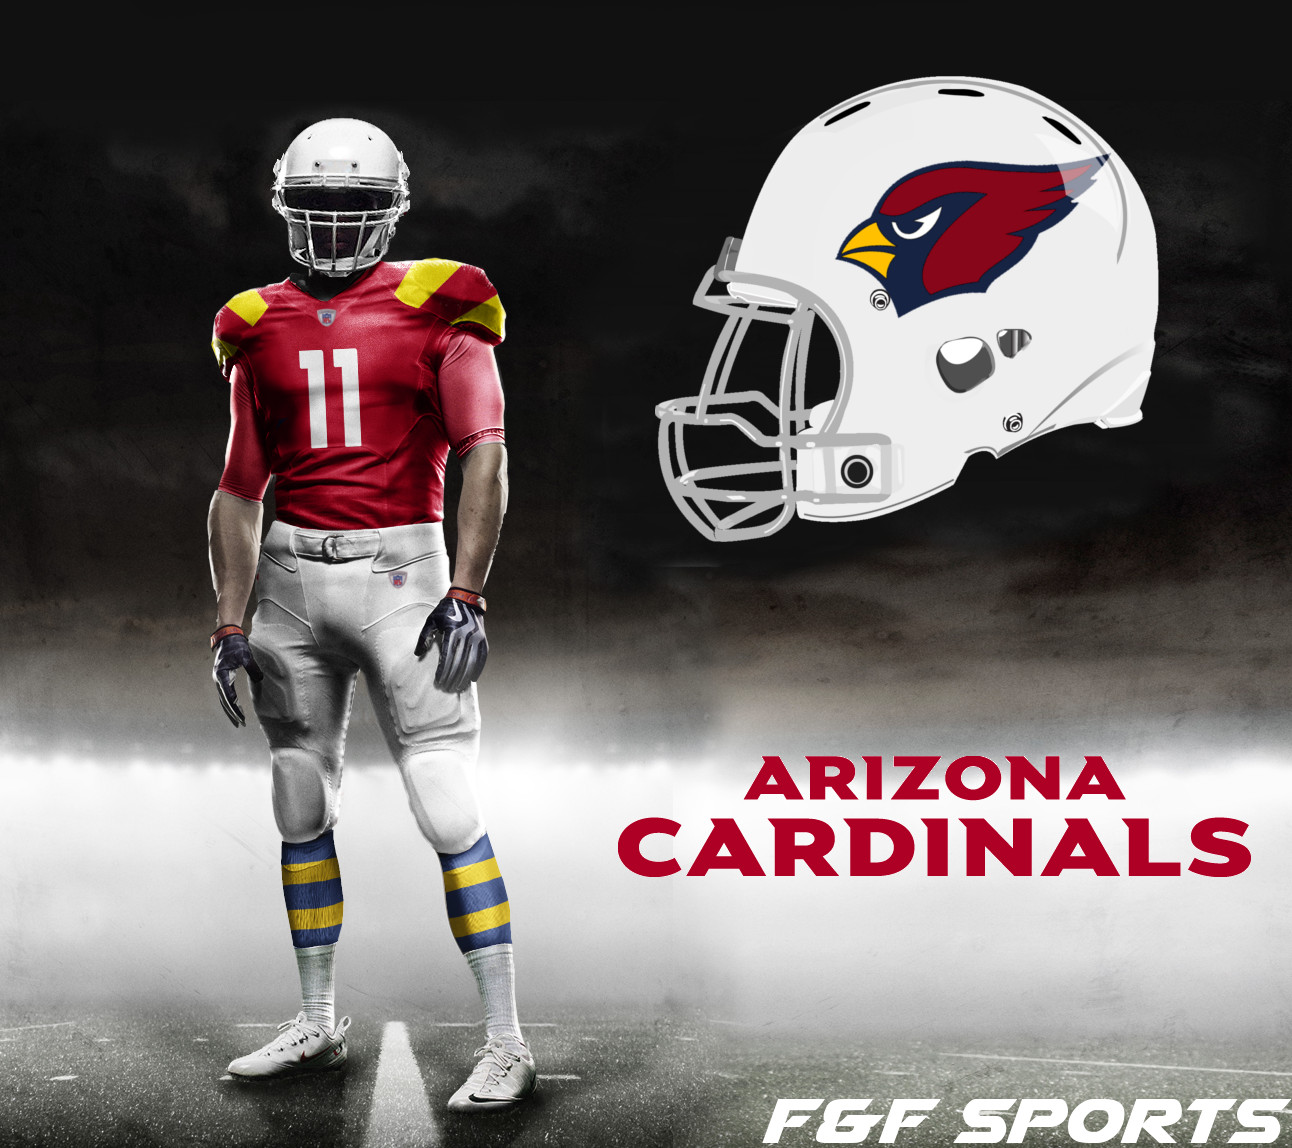 what color jersey are the az cardinals wearing today